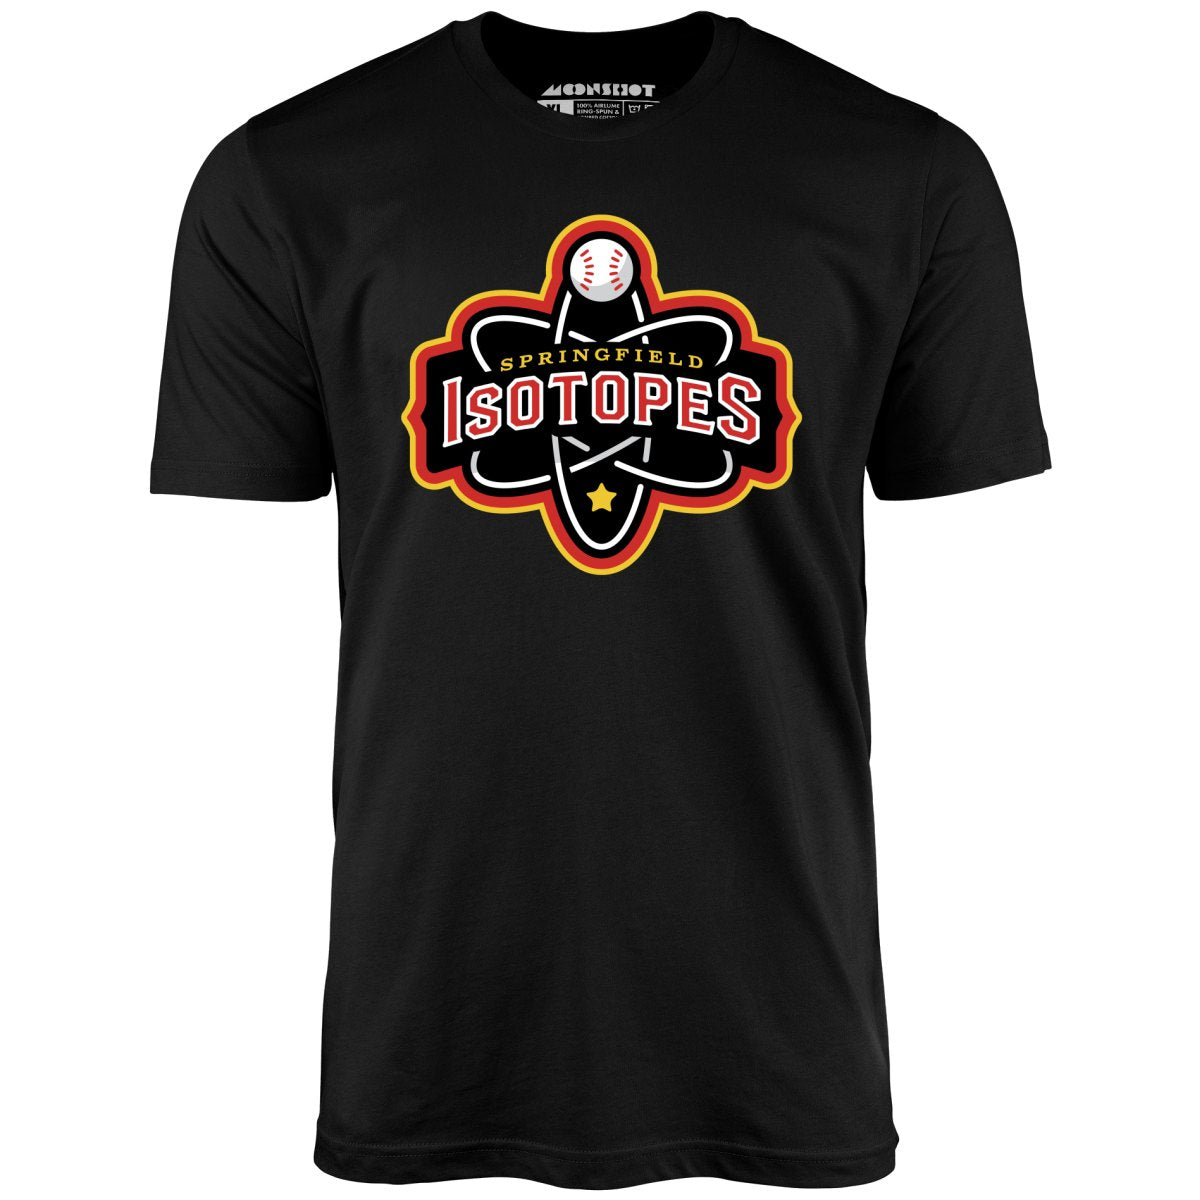 Springfield Isotopes - Unisex T-Shirt